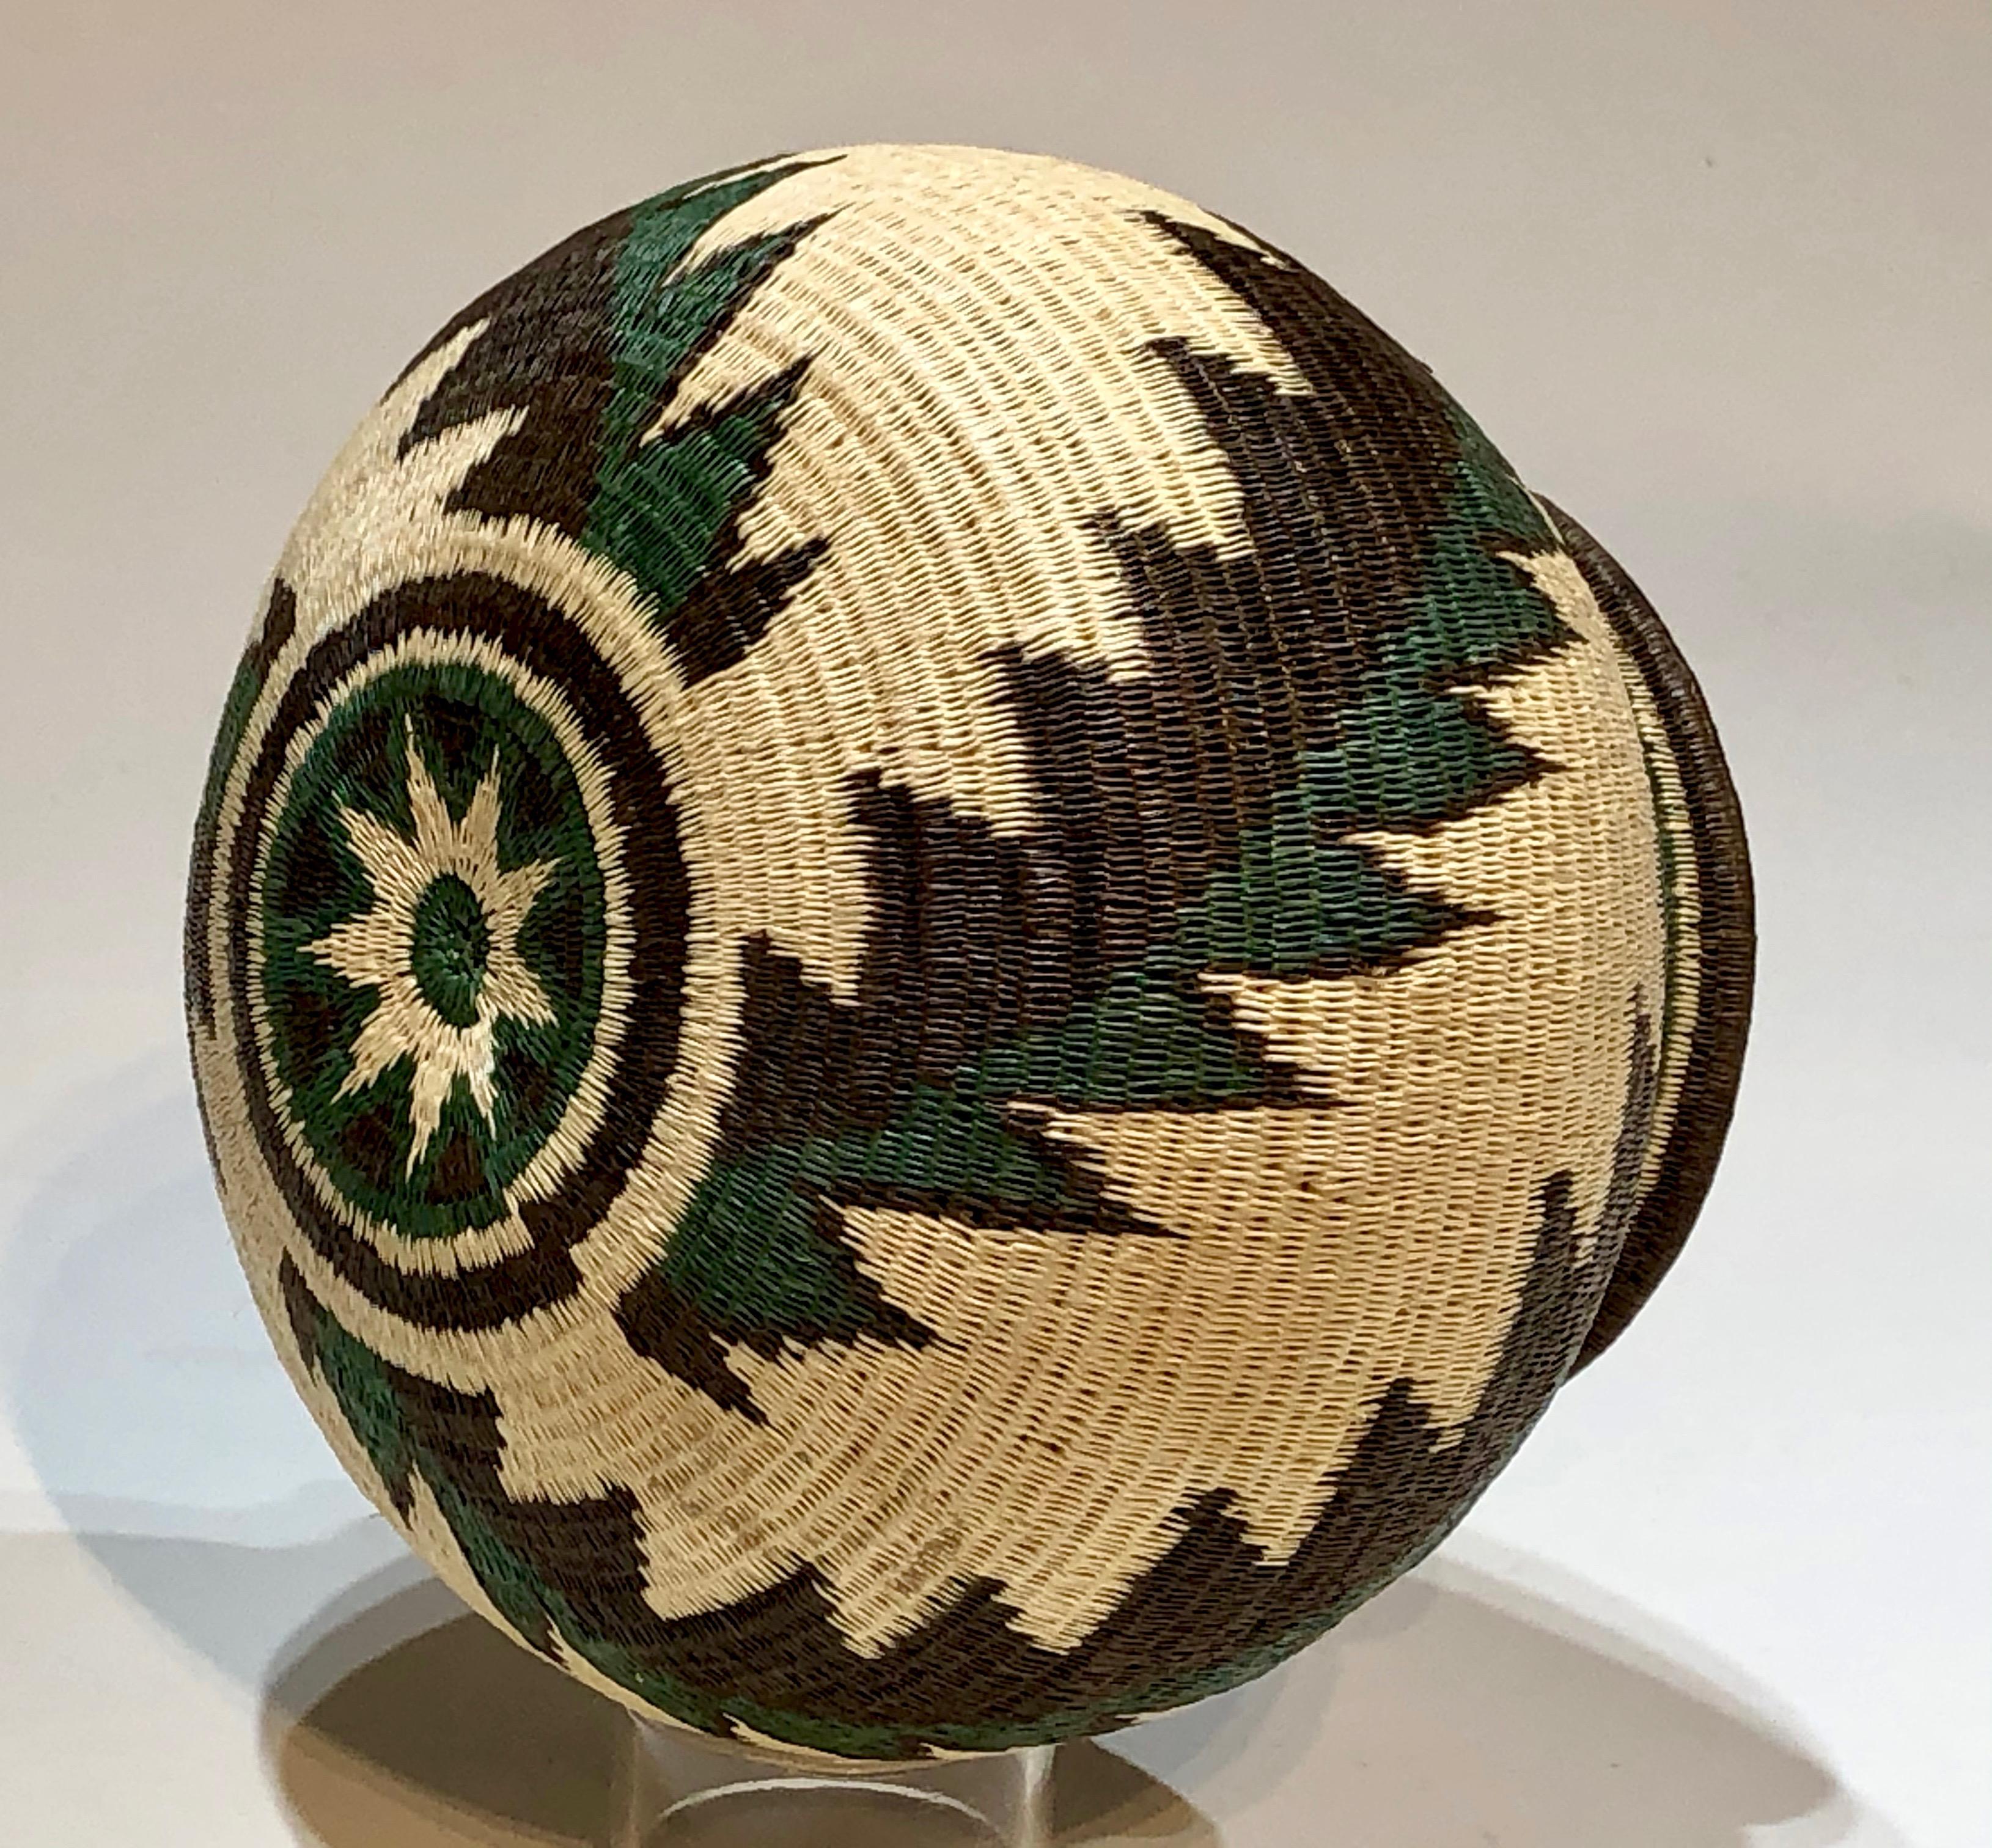 Wounaan Tribe Panama Rainforest Basket, green, white, black, feather design - Contemporary Mixed Media Art by Unknown